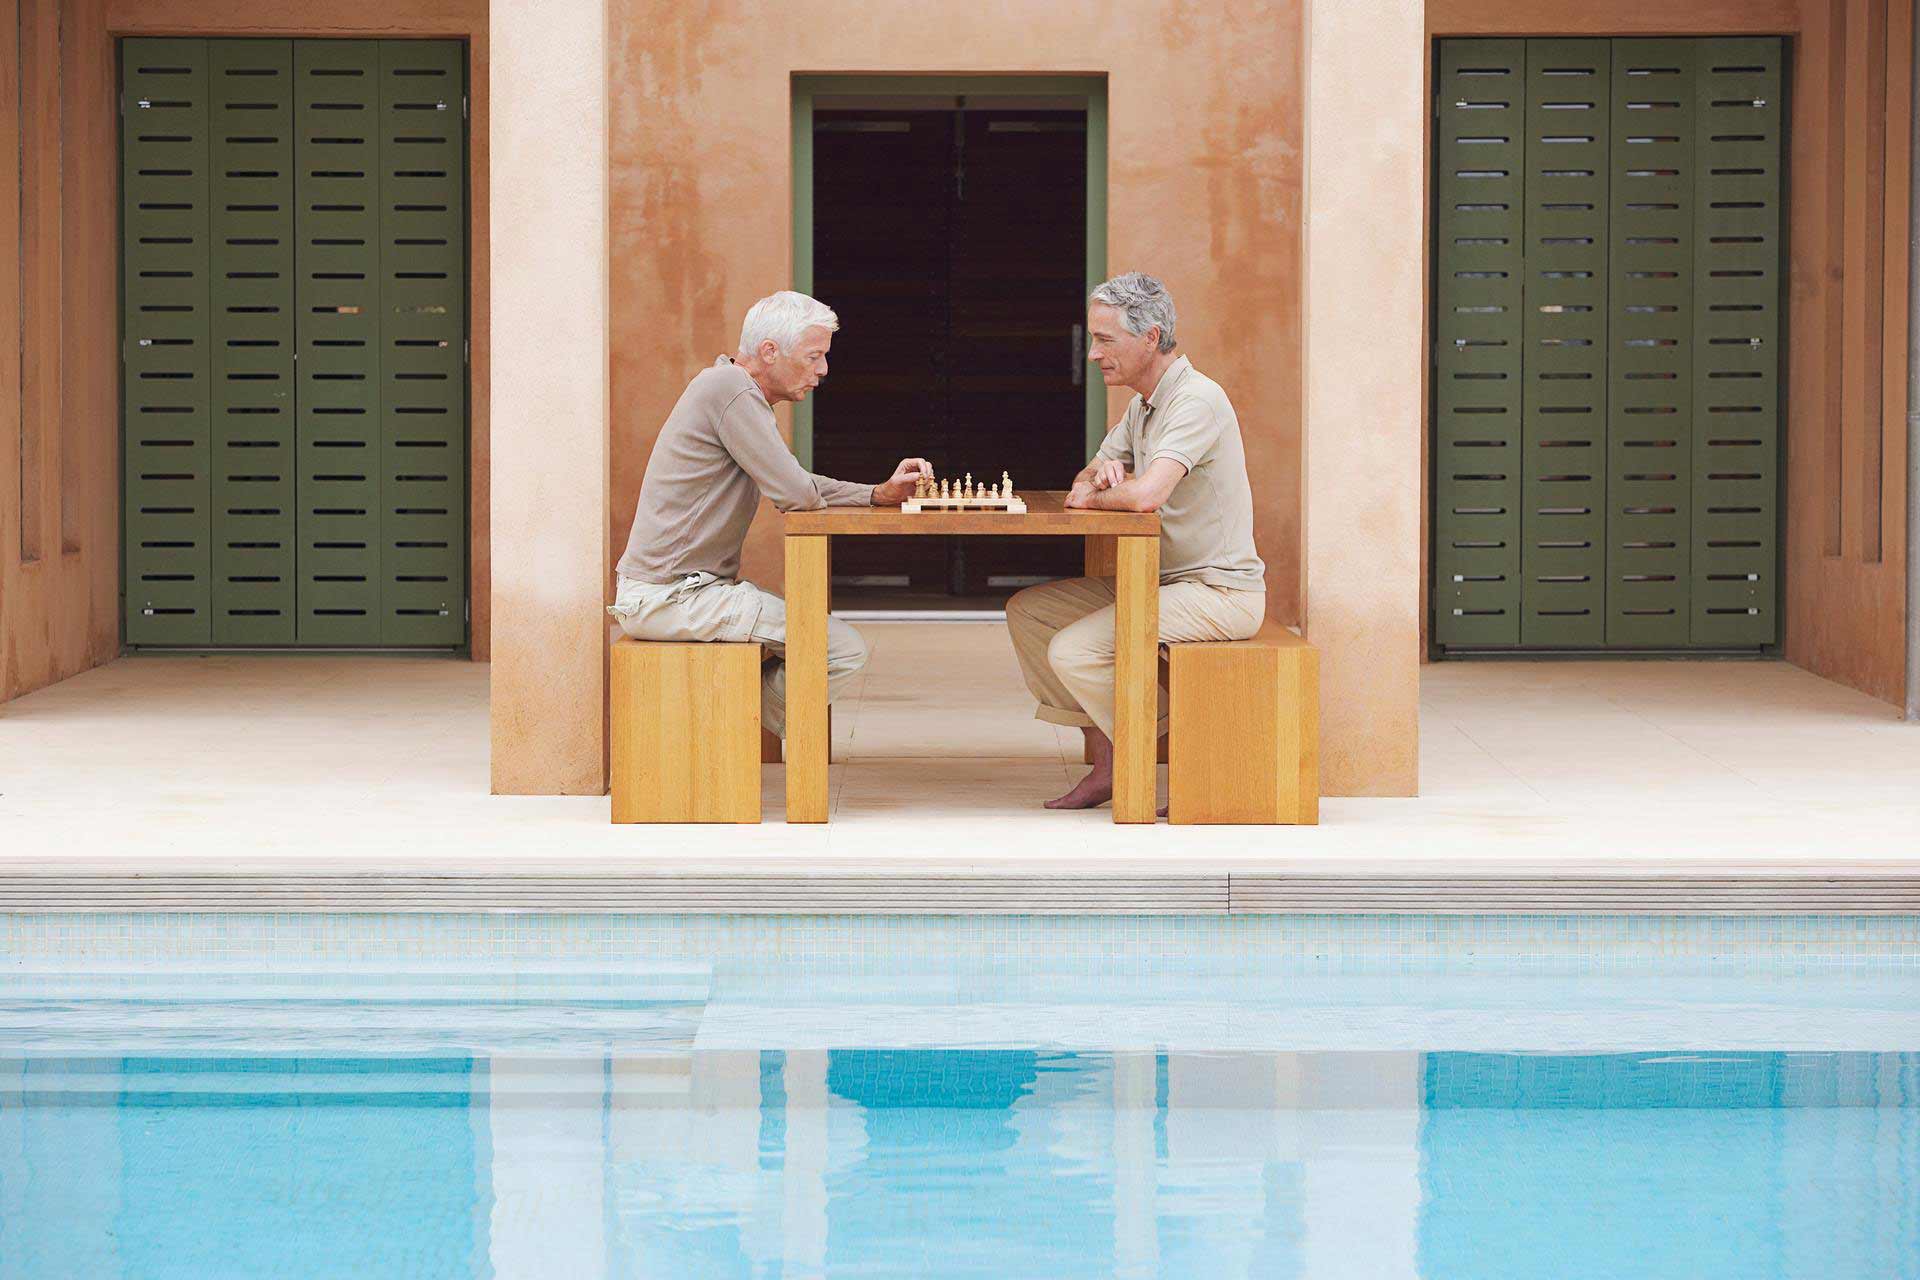 Two men sit by a pool and play a game of chess